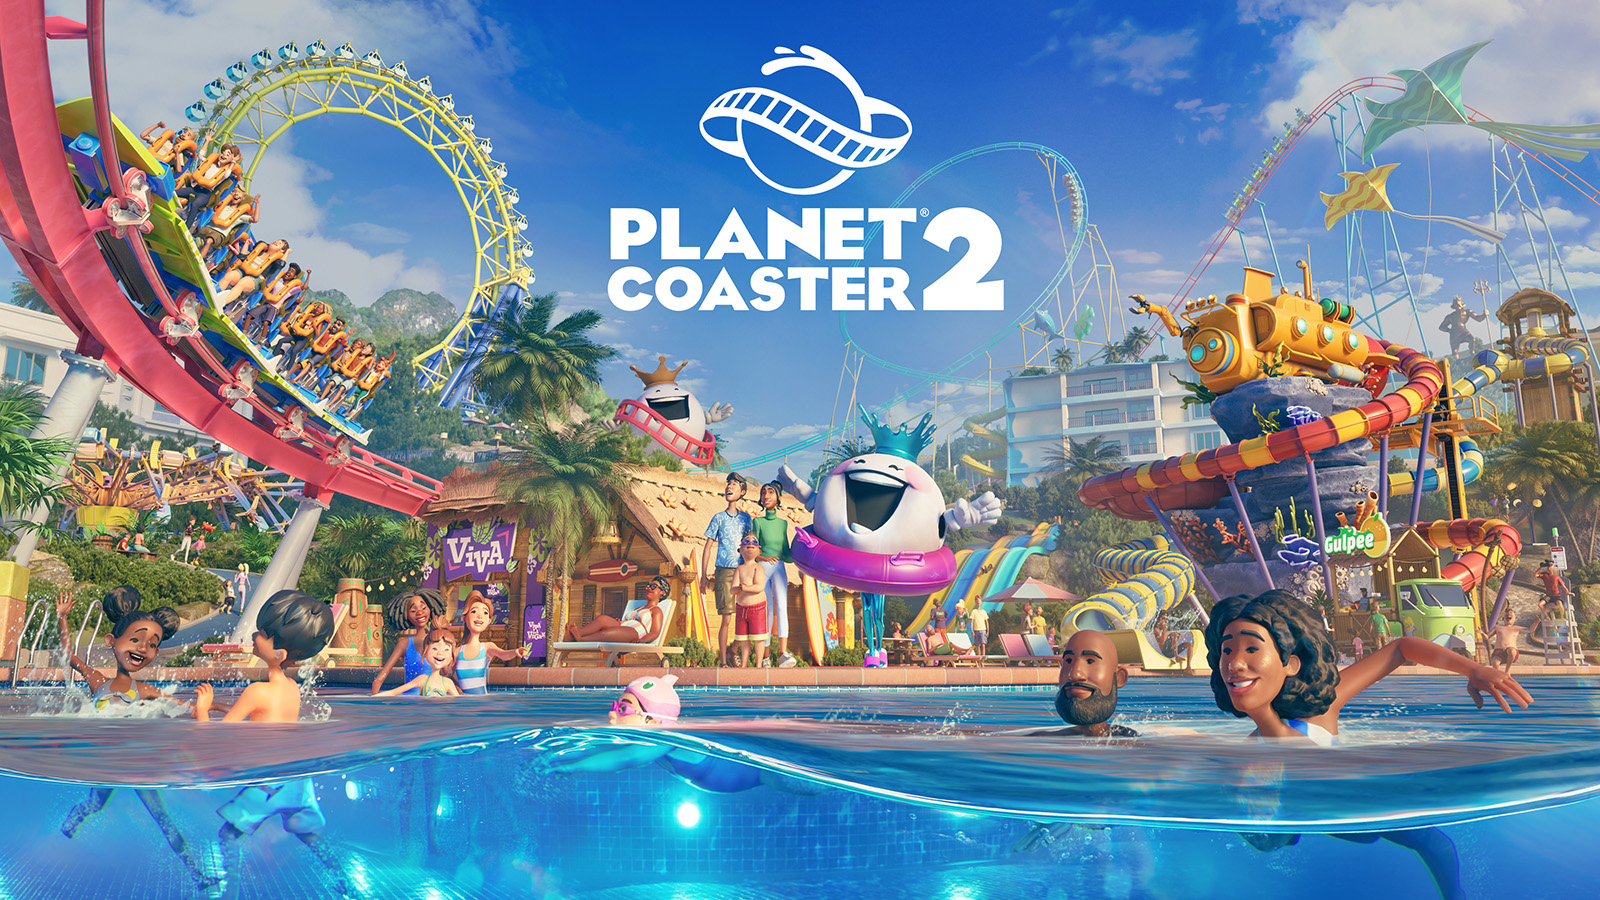 The official artwork for Planet Coaster 2, showing the water park players can create